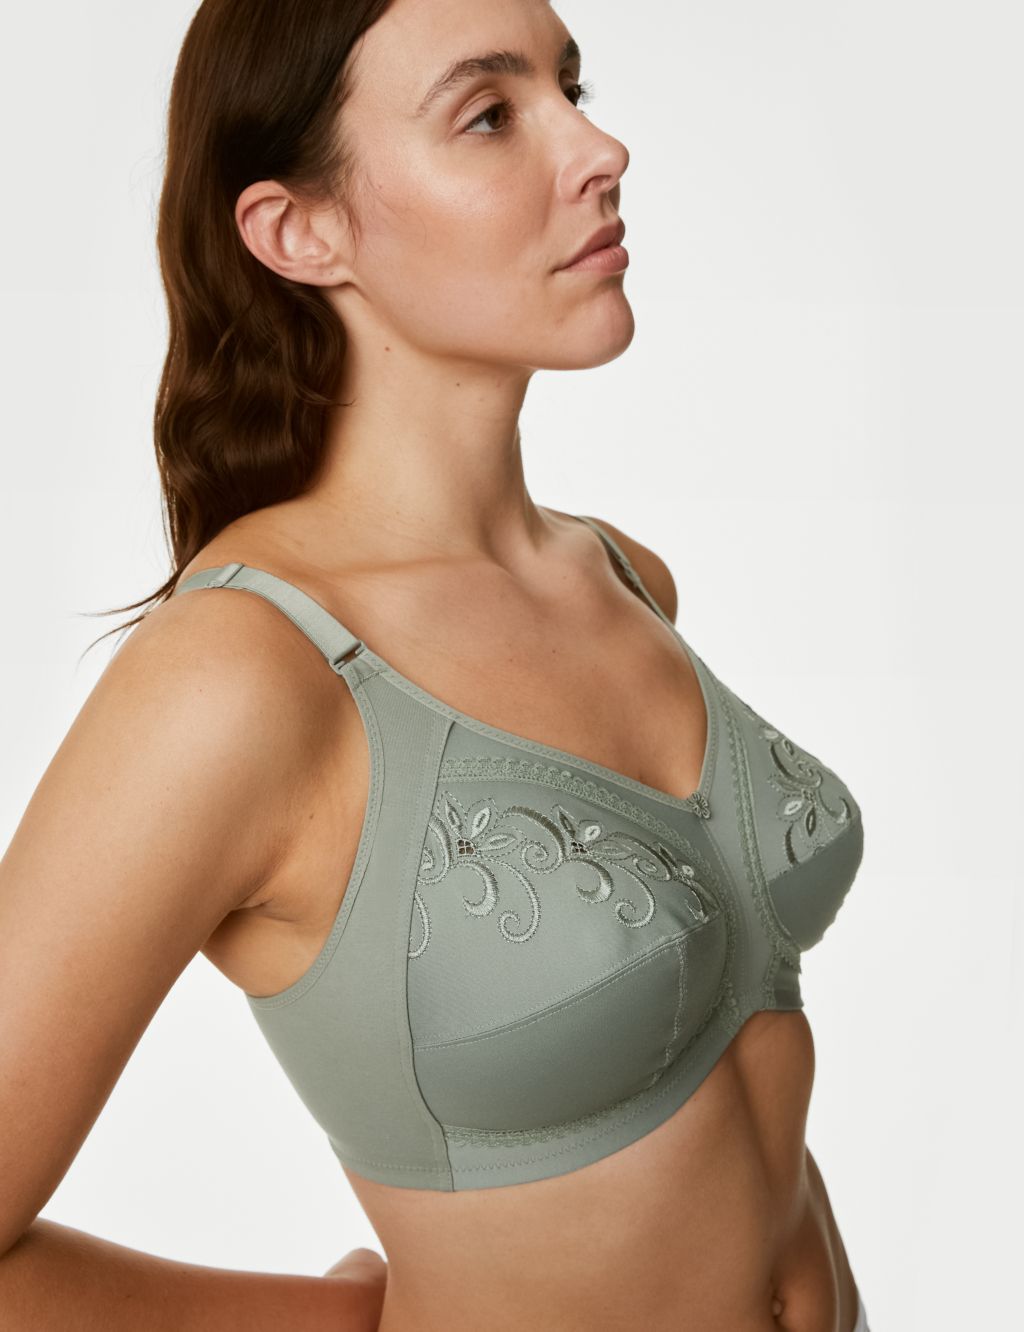 Total Support Embroidered Full Cup Bra B-G image 3